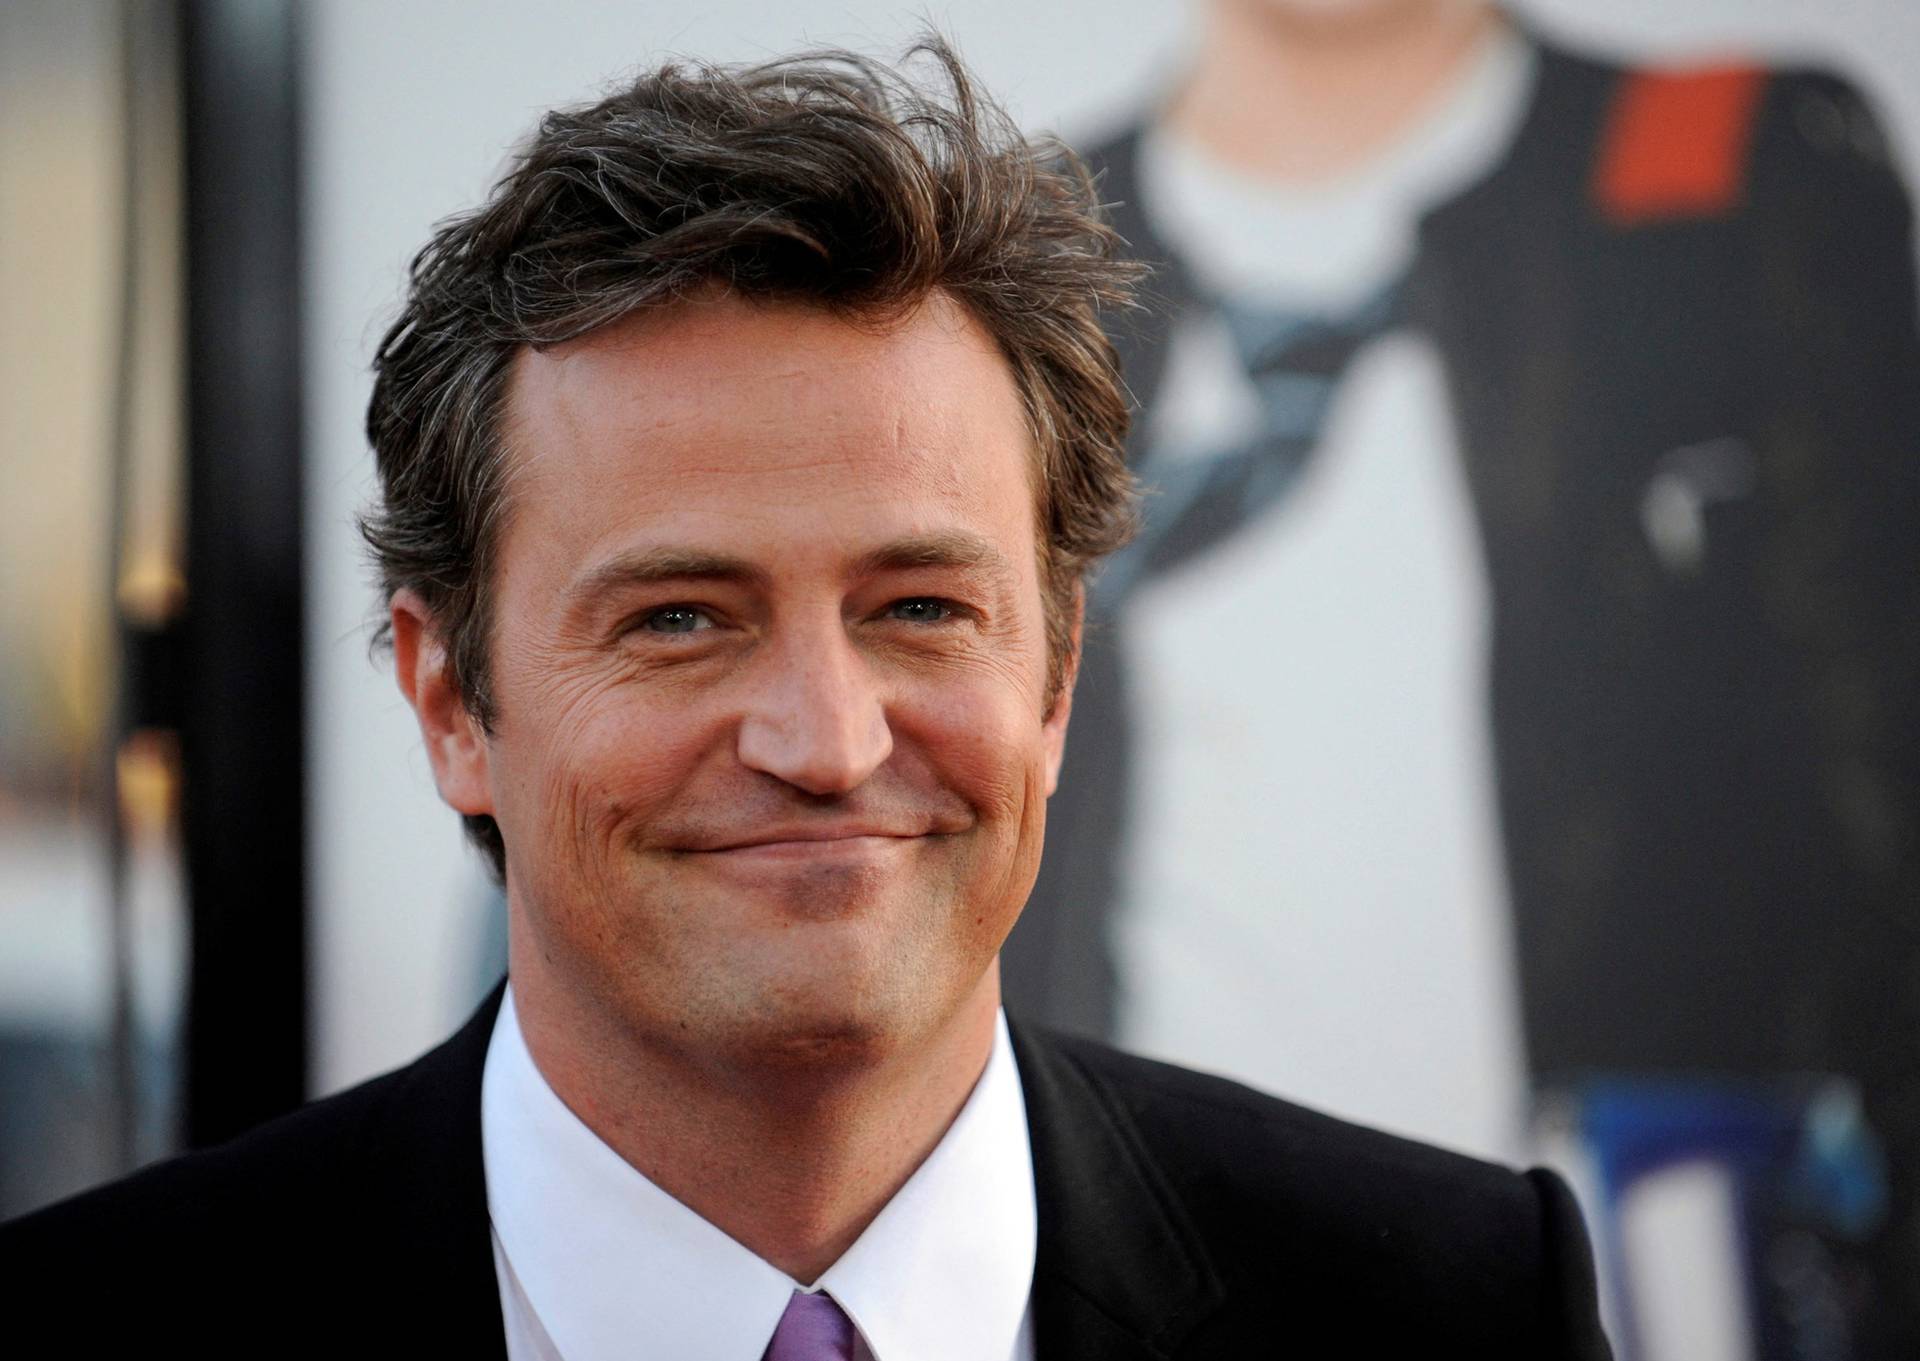 FILE PHOTO: Cast member Matthew Perry attends the premiere of the film "17 Again" in Los Angeles